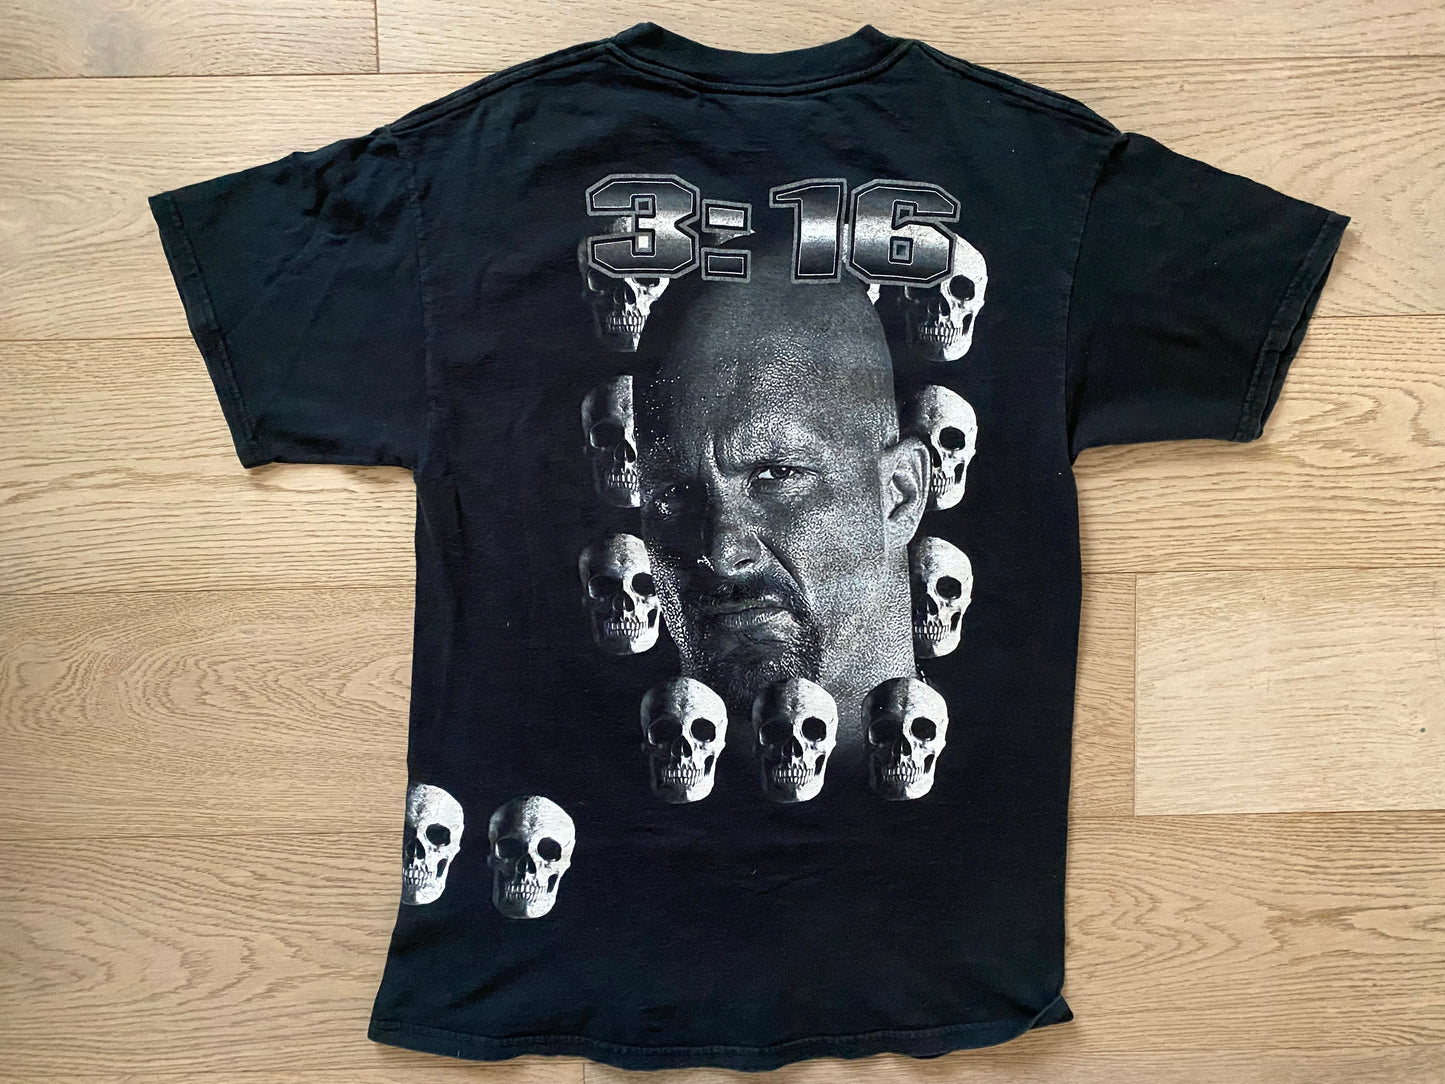 2000 WWF “Stone Cold” Steve Austin two sided shirt